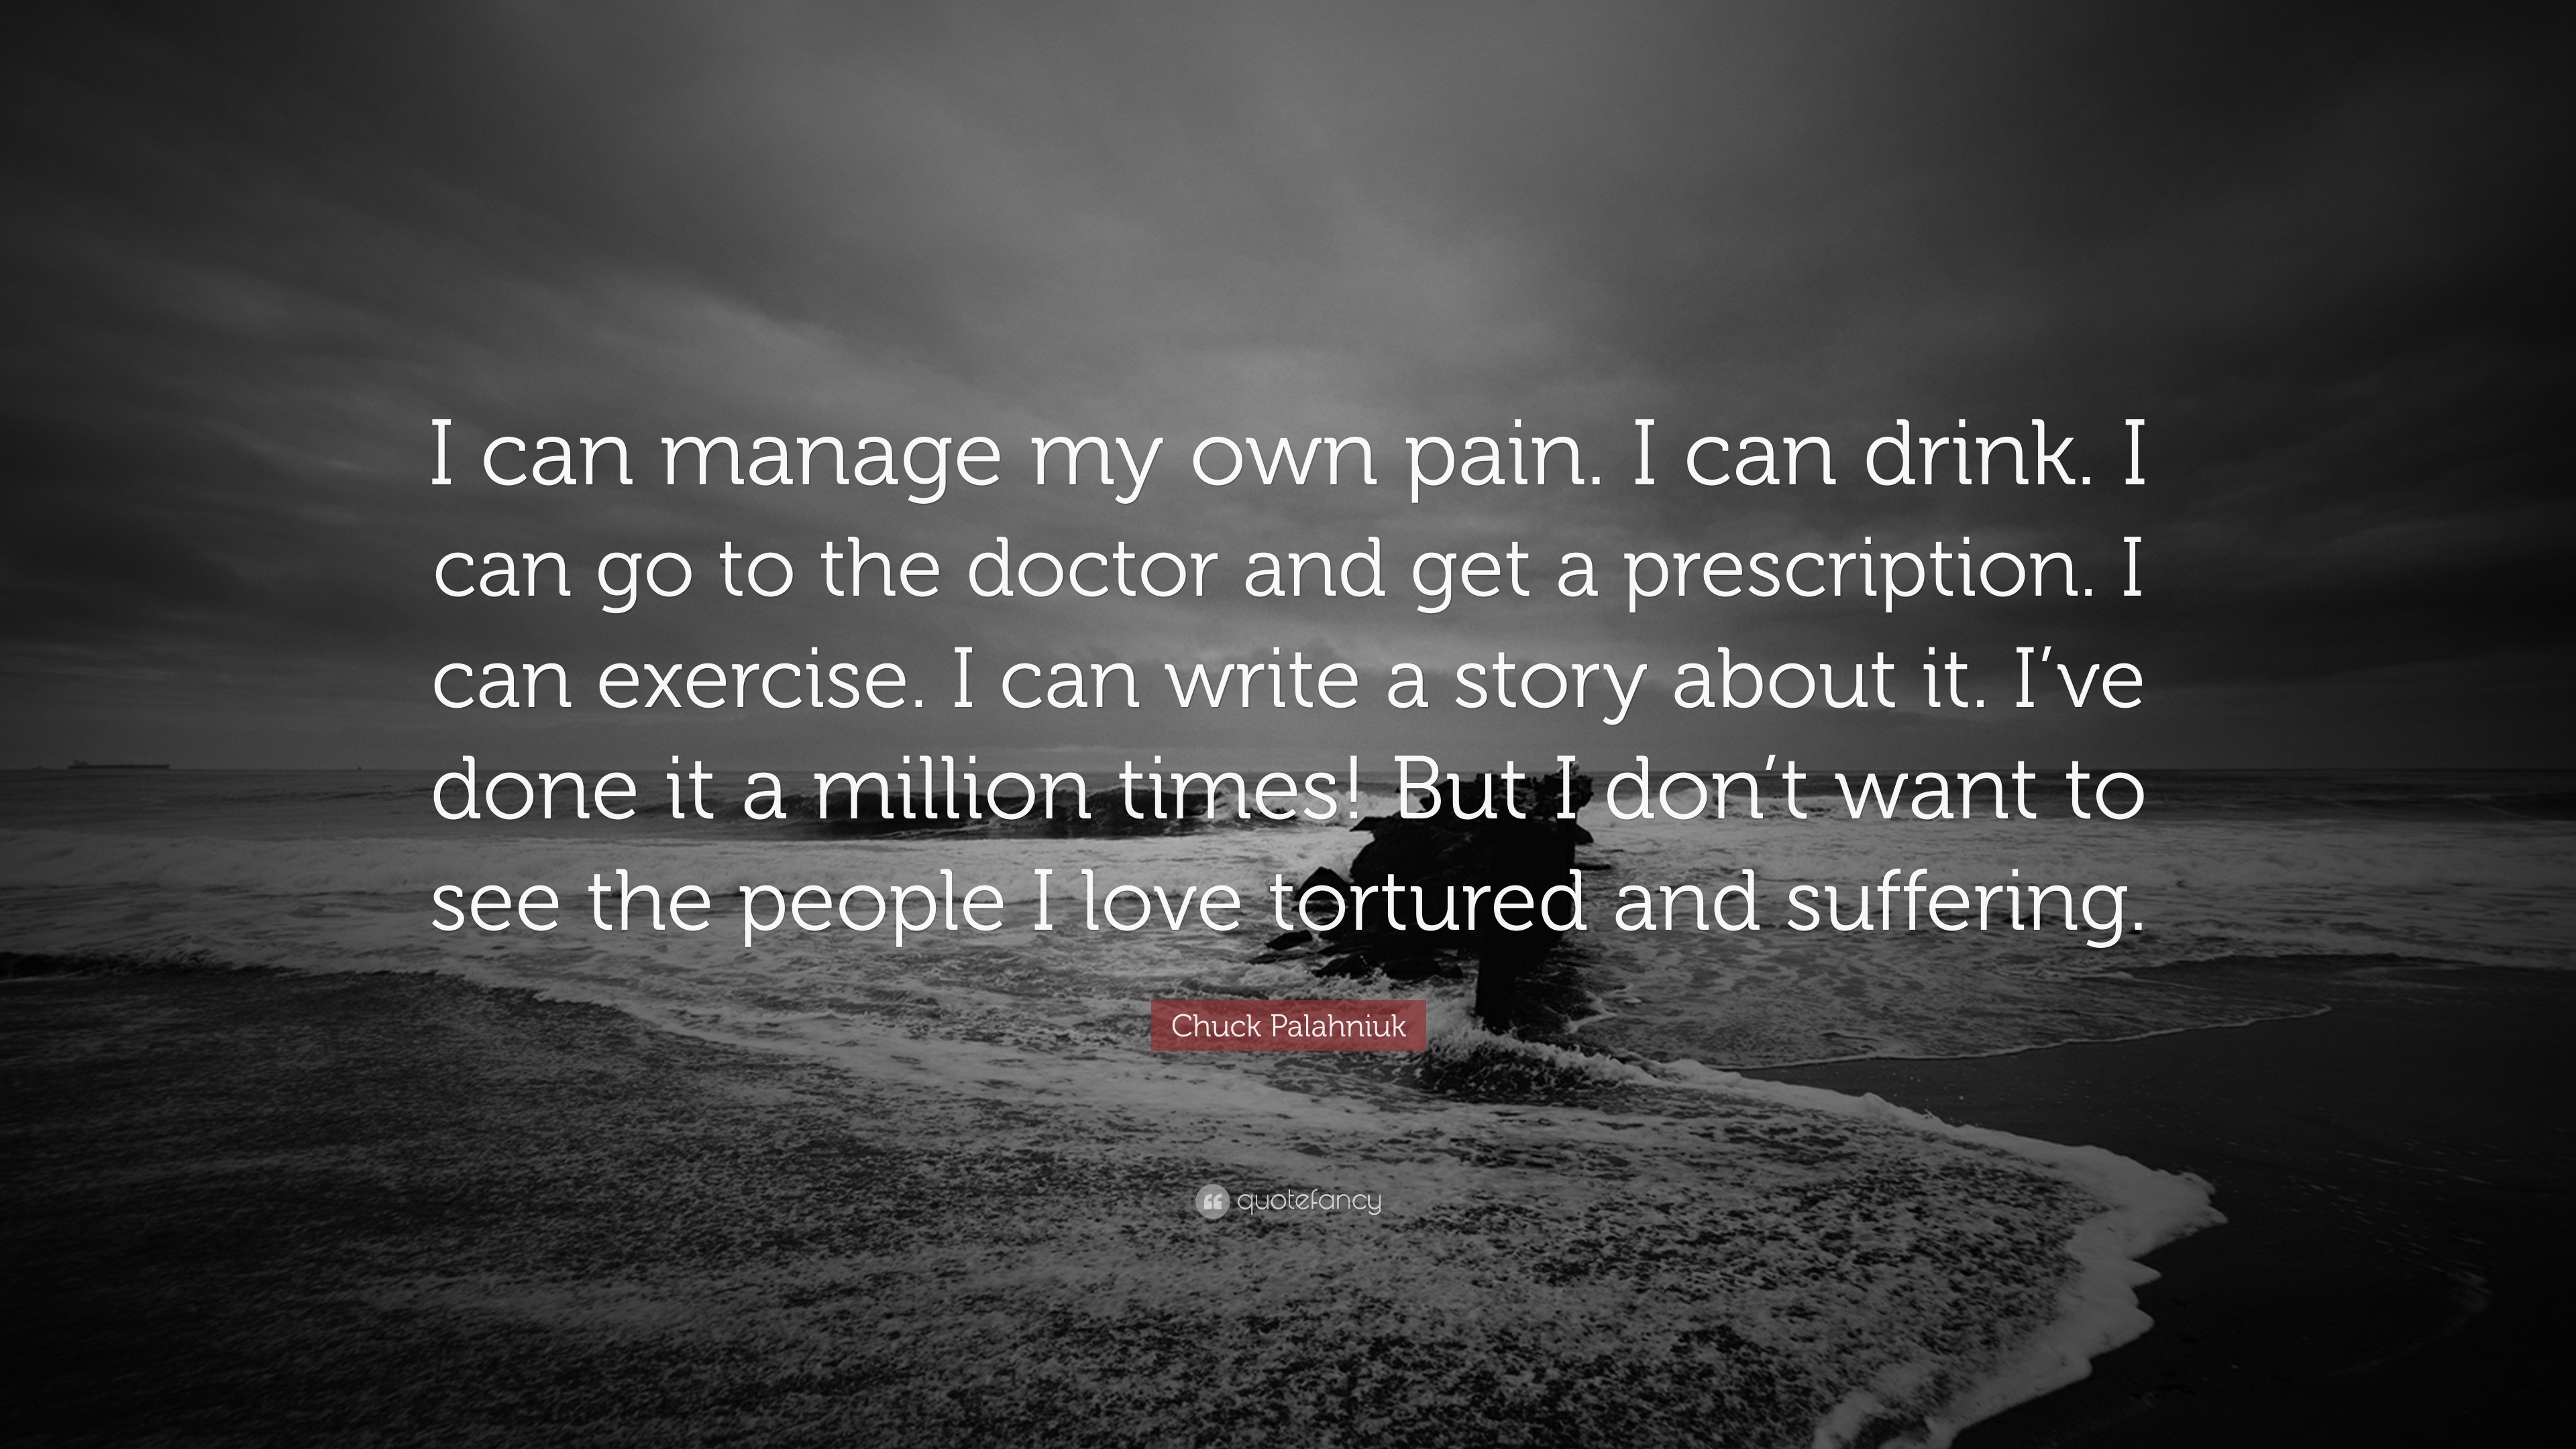 Chuck Palahniuk Quote “I can manage my own pain I can drink